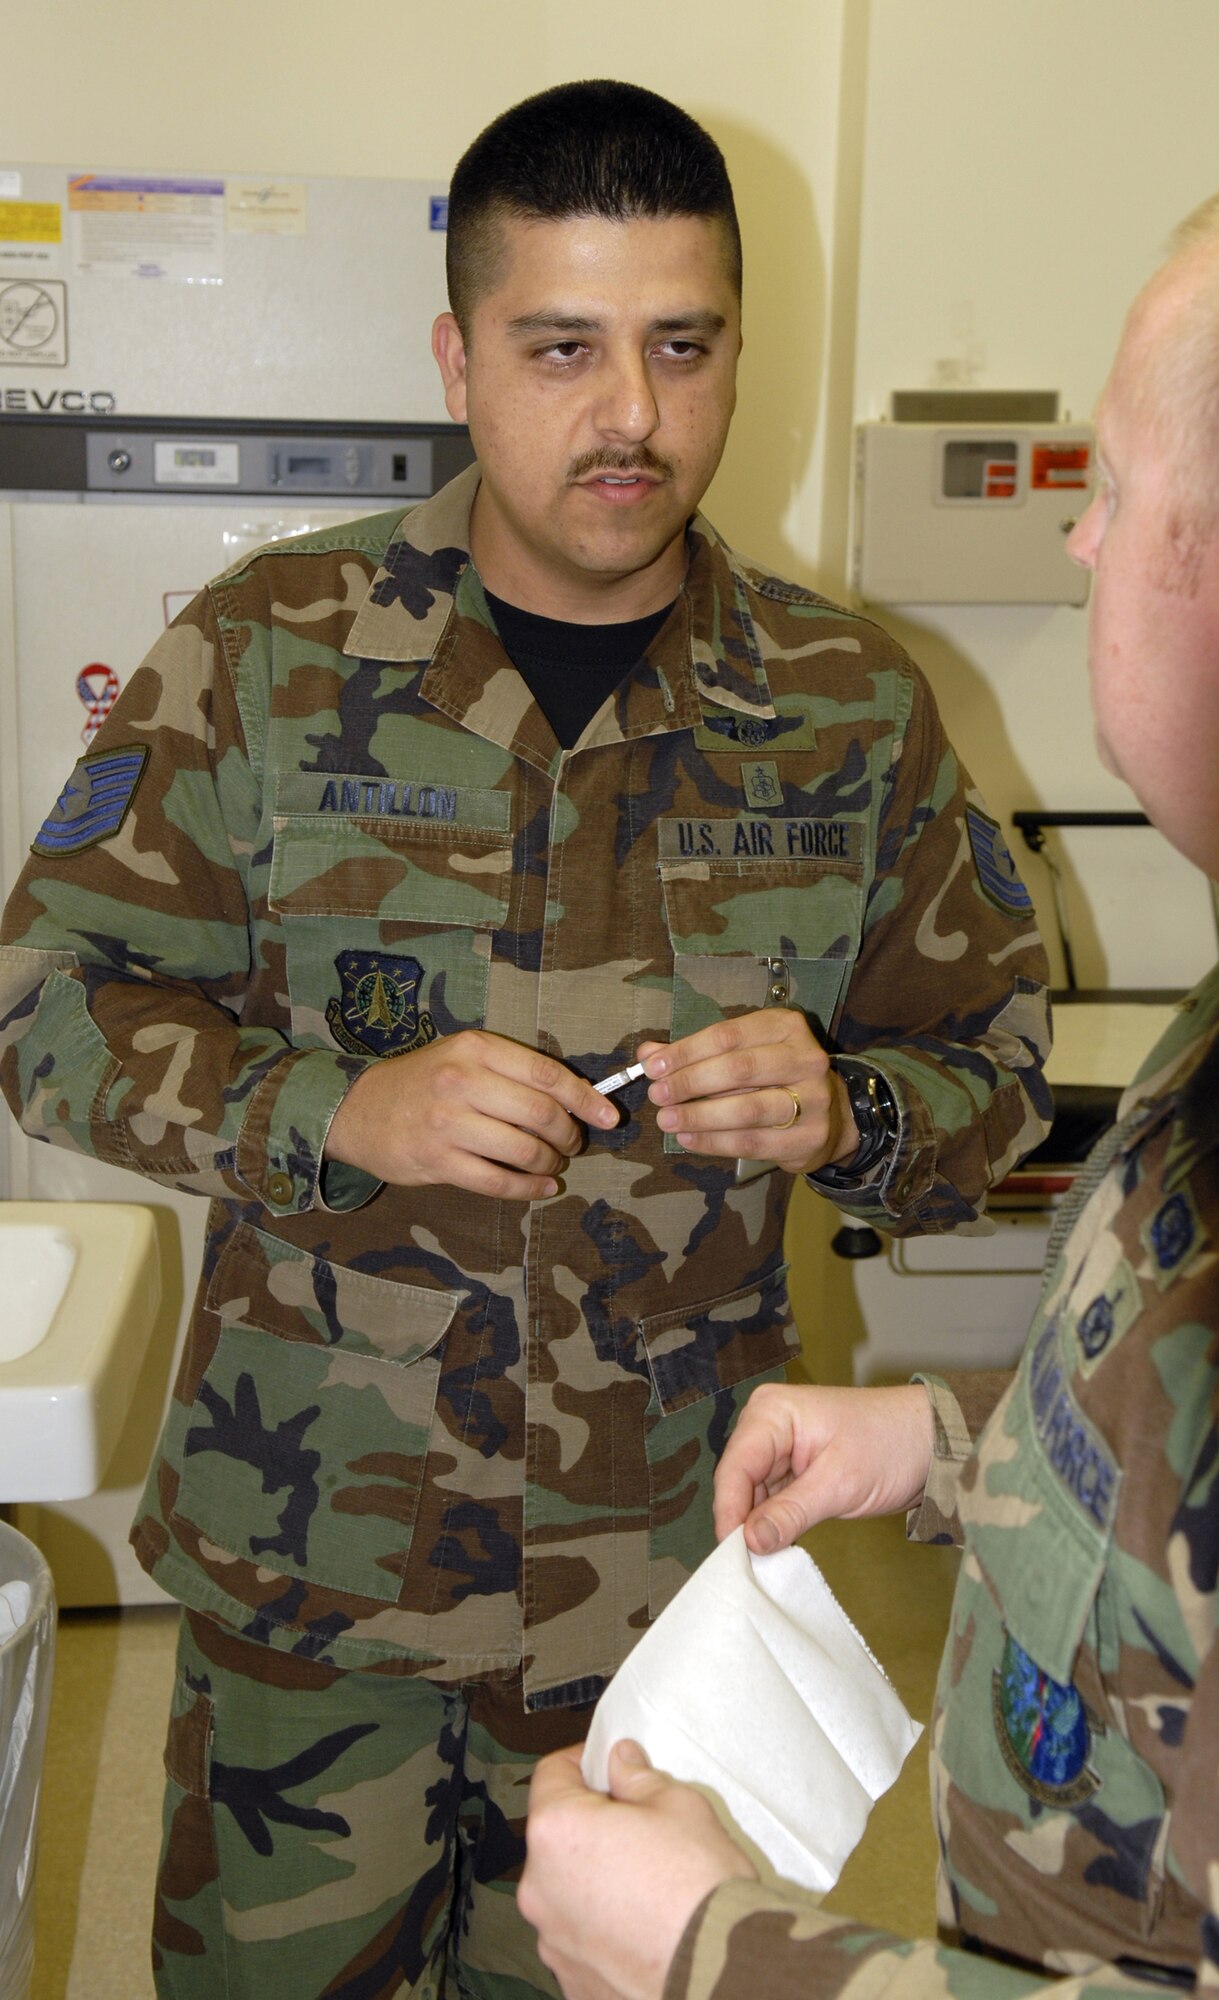 VANDENBERG AIR FORCE BASE, Calif. -- Tech. Sgt. Jesus Antillon gives preparation instructions before he gives the intranasal influenza vaccine to a patient at the immunization clinic on Nov. 13.  The 30th Medical Group pediatrics NCOIC gives the vaccine as an annual requirement for all active duty members to combat the potential of catching the influenza virus. (U.S. Air Force photo/Airman 1st Class Adam Guy)